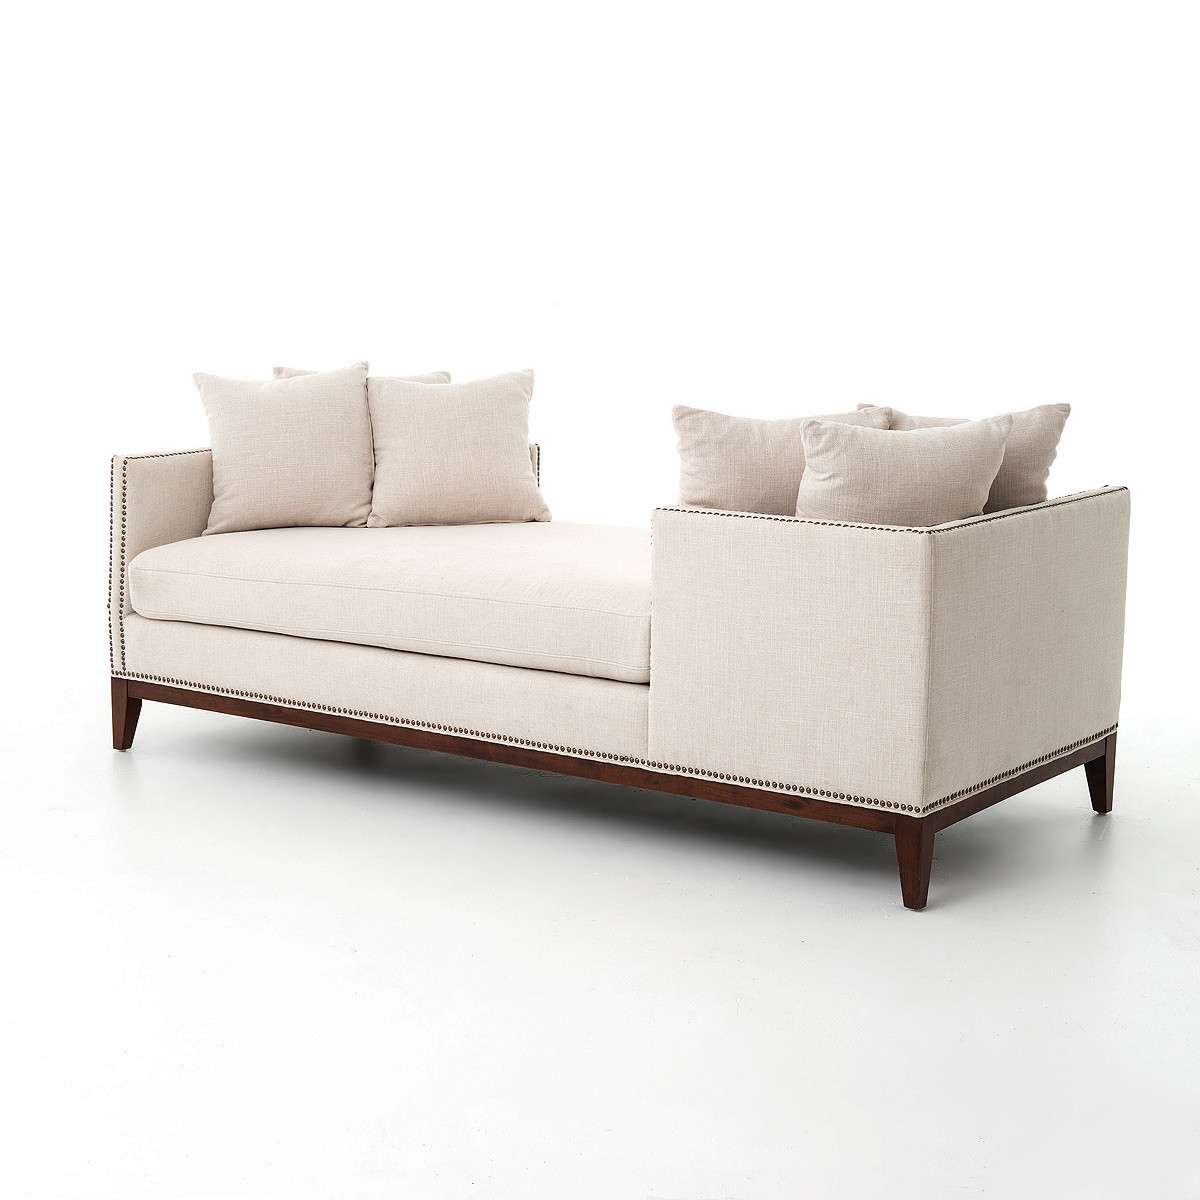 Kensington Beige Linen Upholstered Double Chaise Daybed 